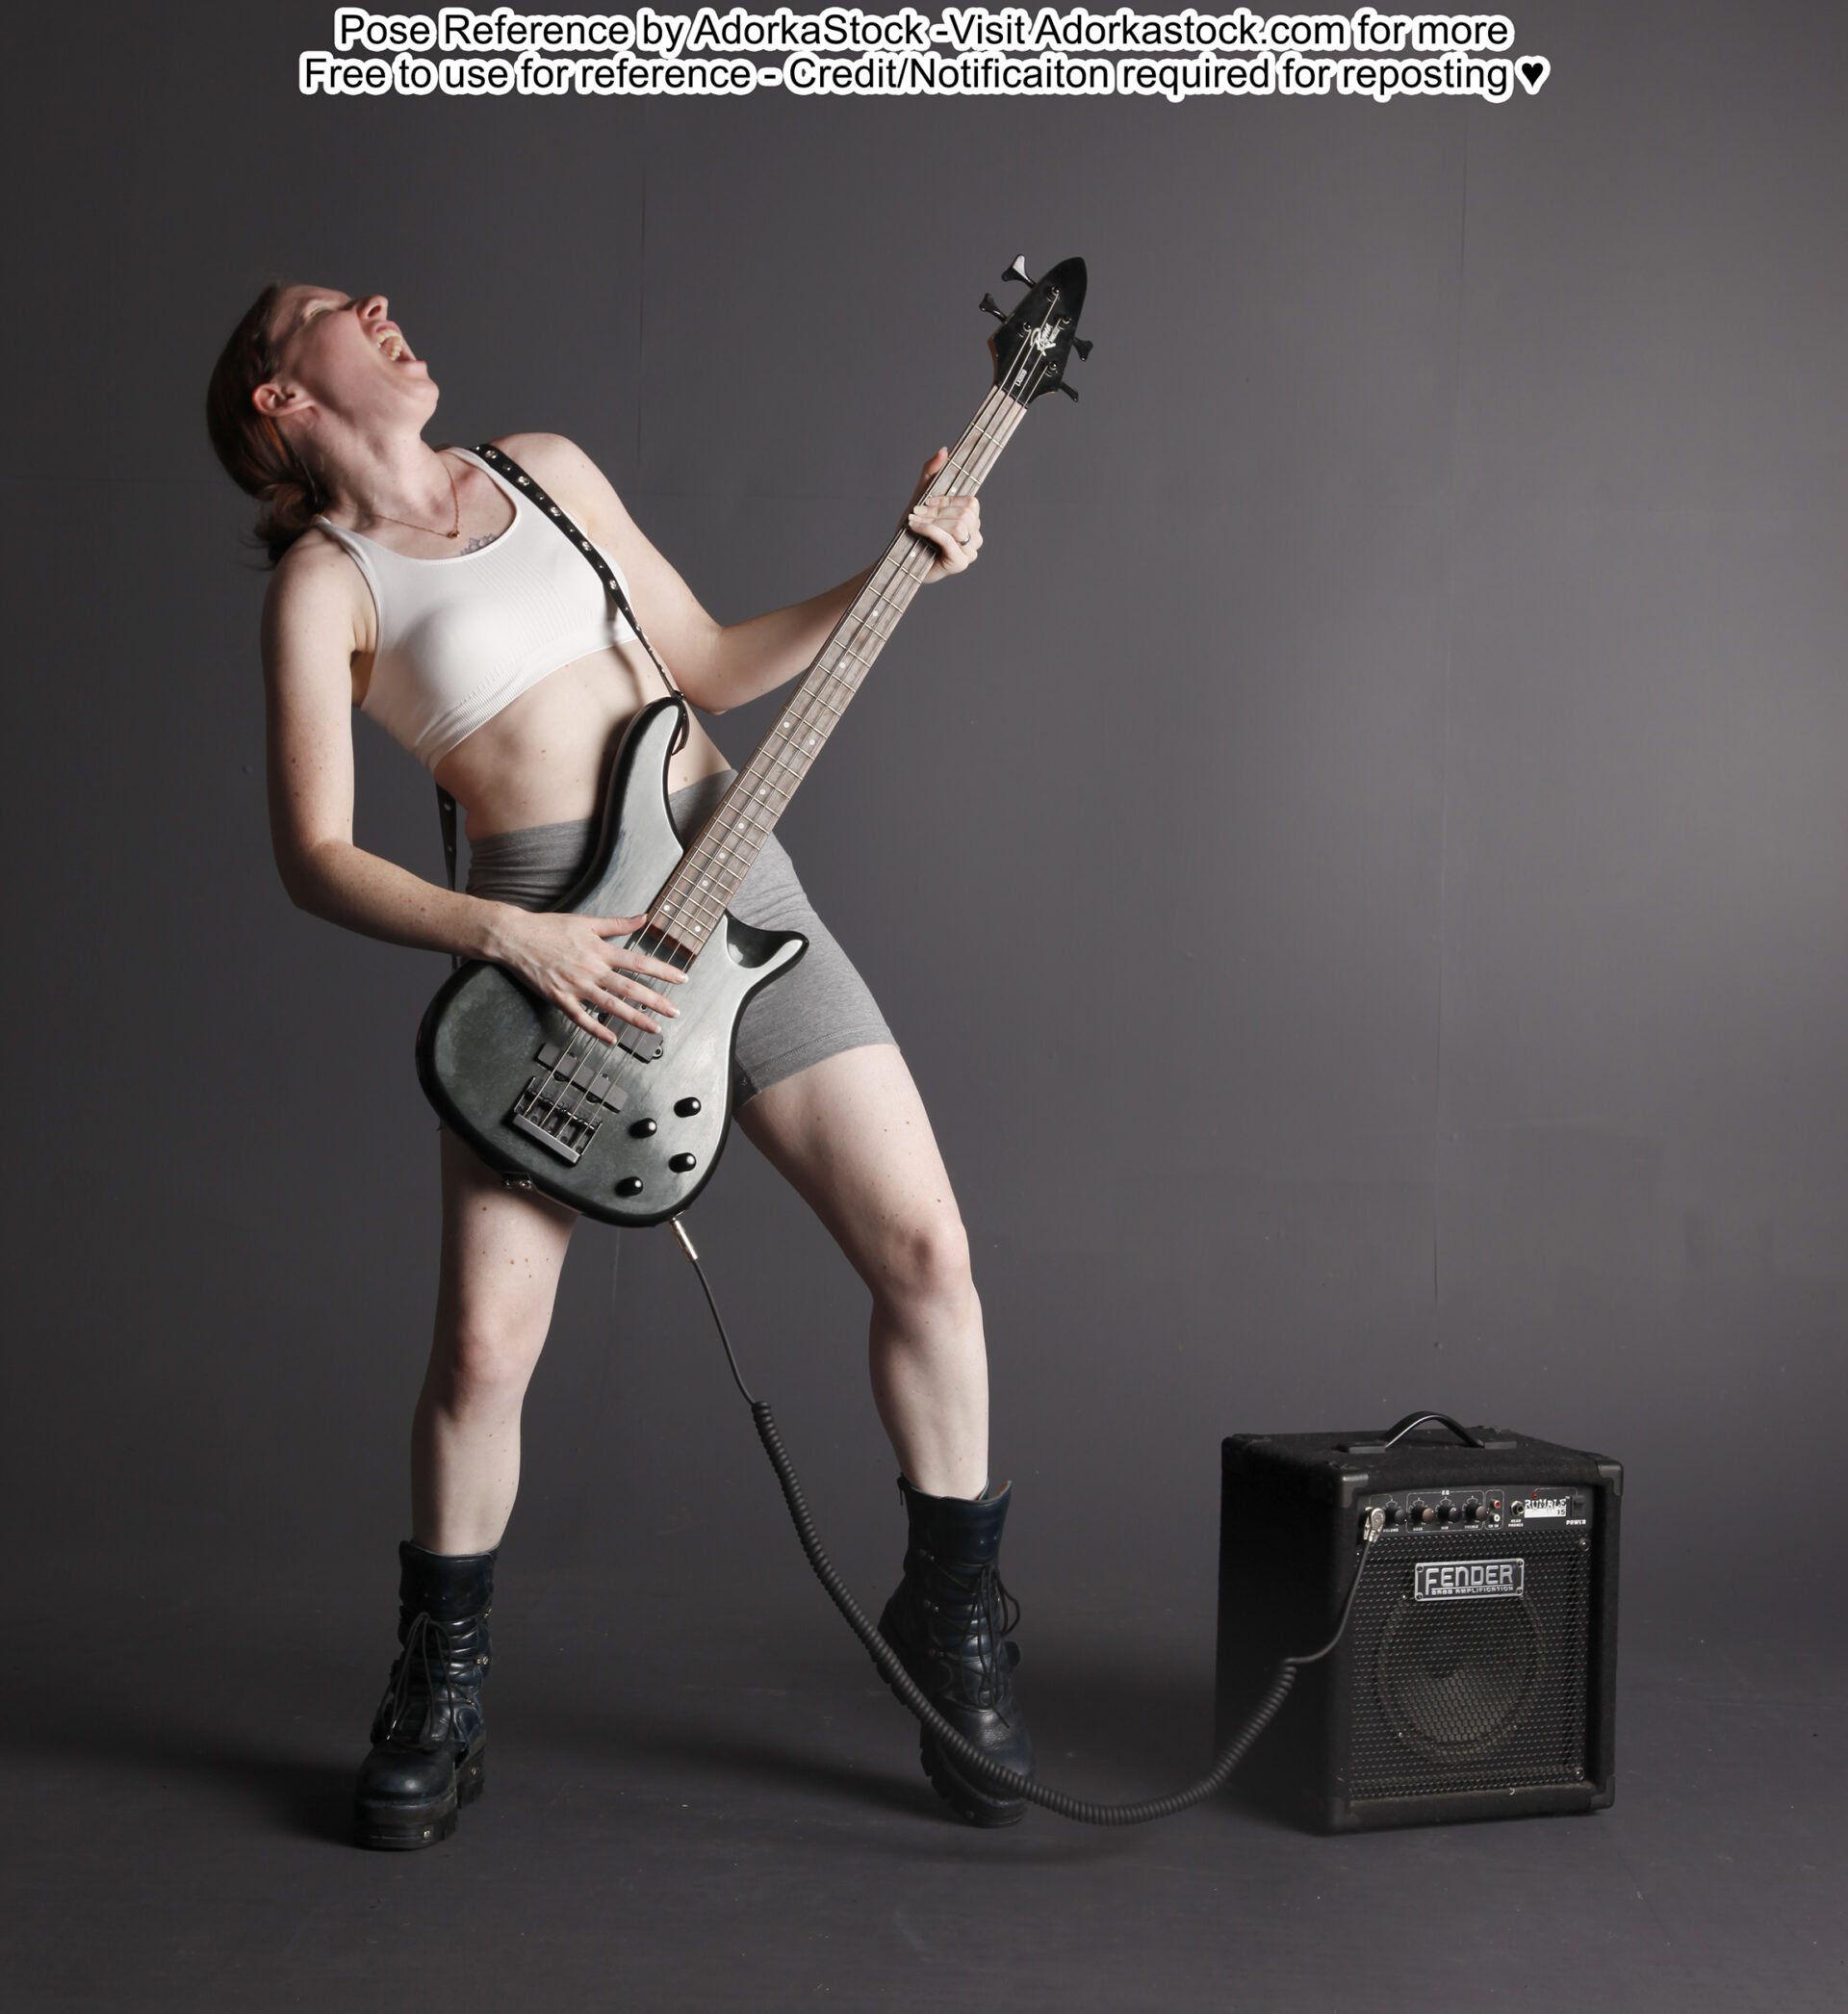 Thin, white, female pose reference model in standing pose with a base guitar and amp, rocking out with her head back.